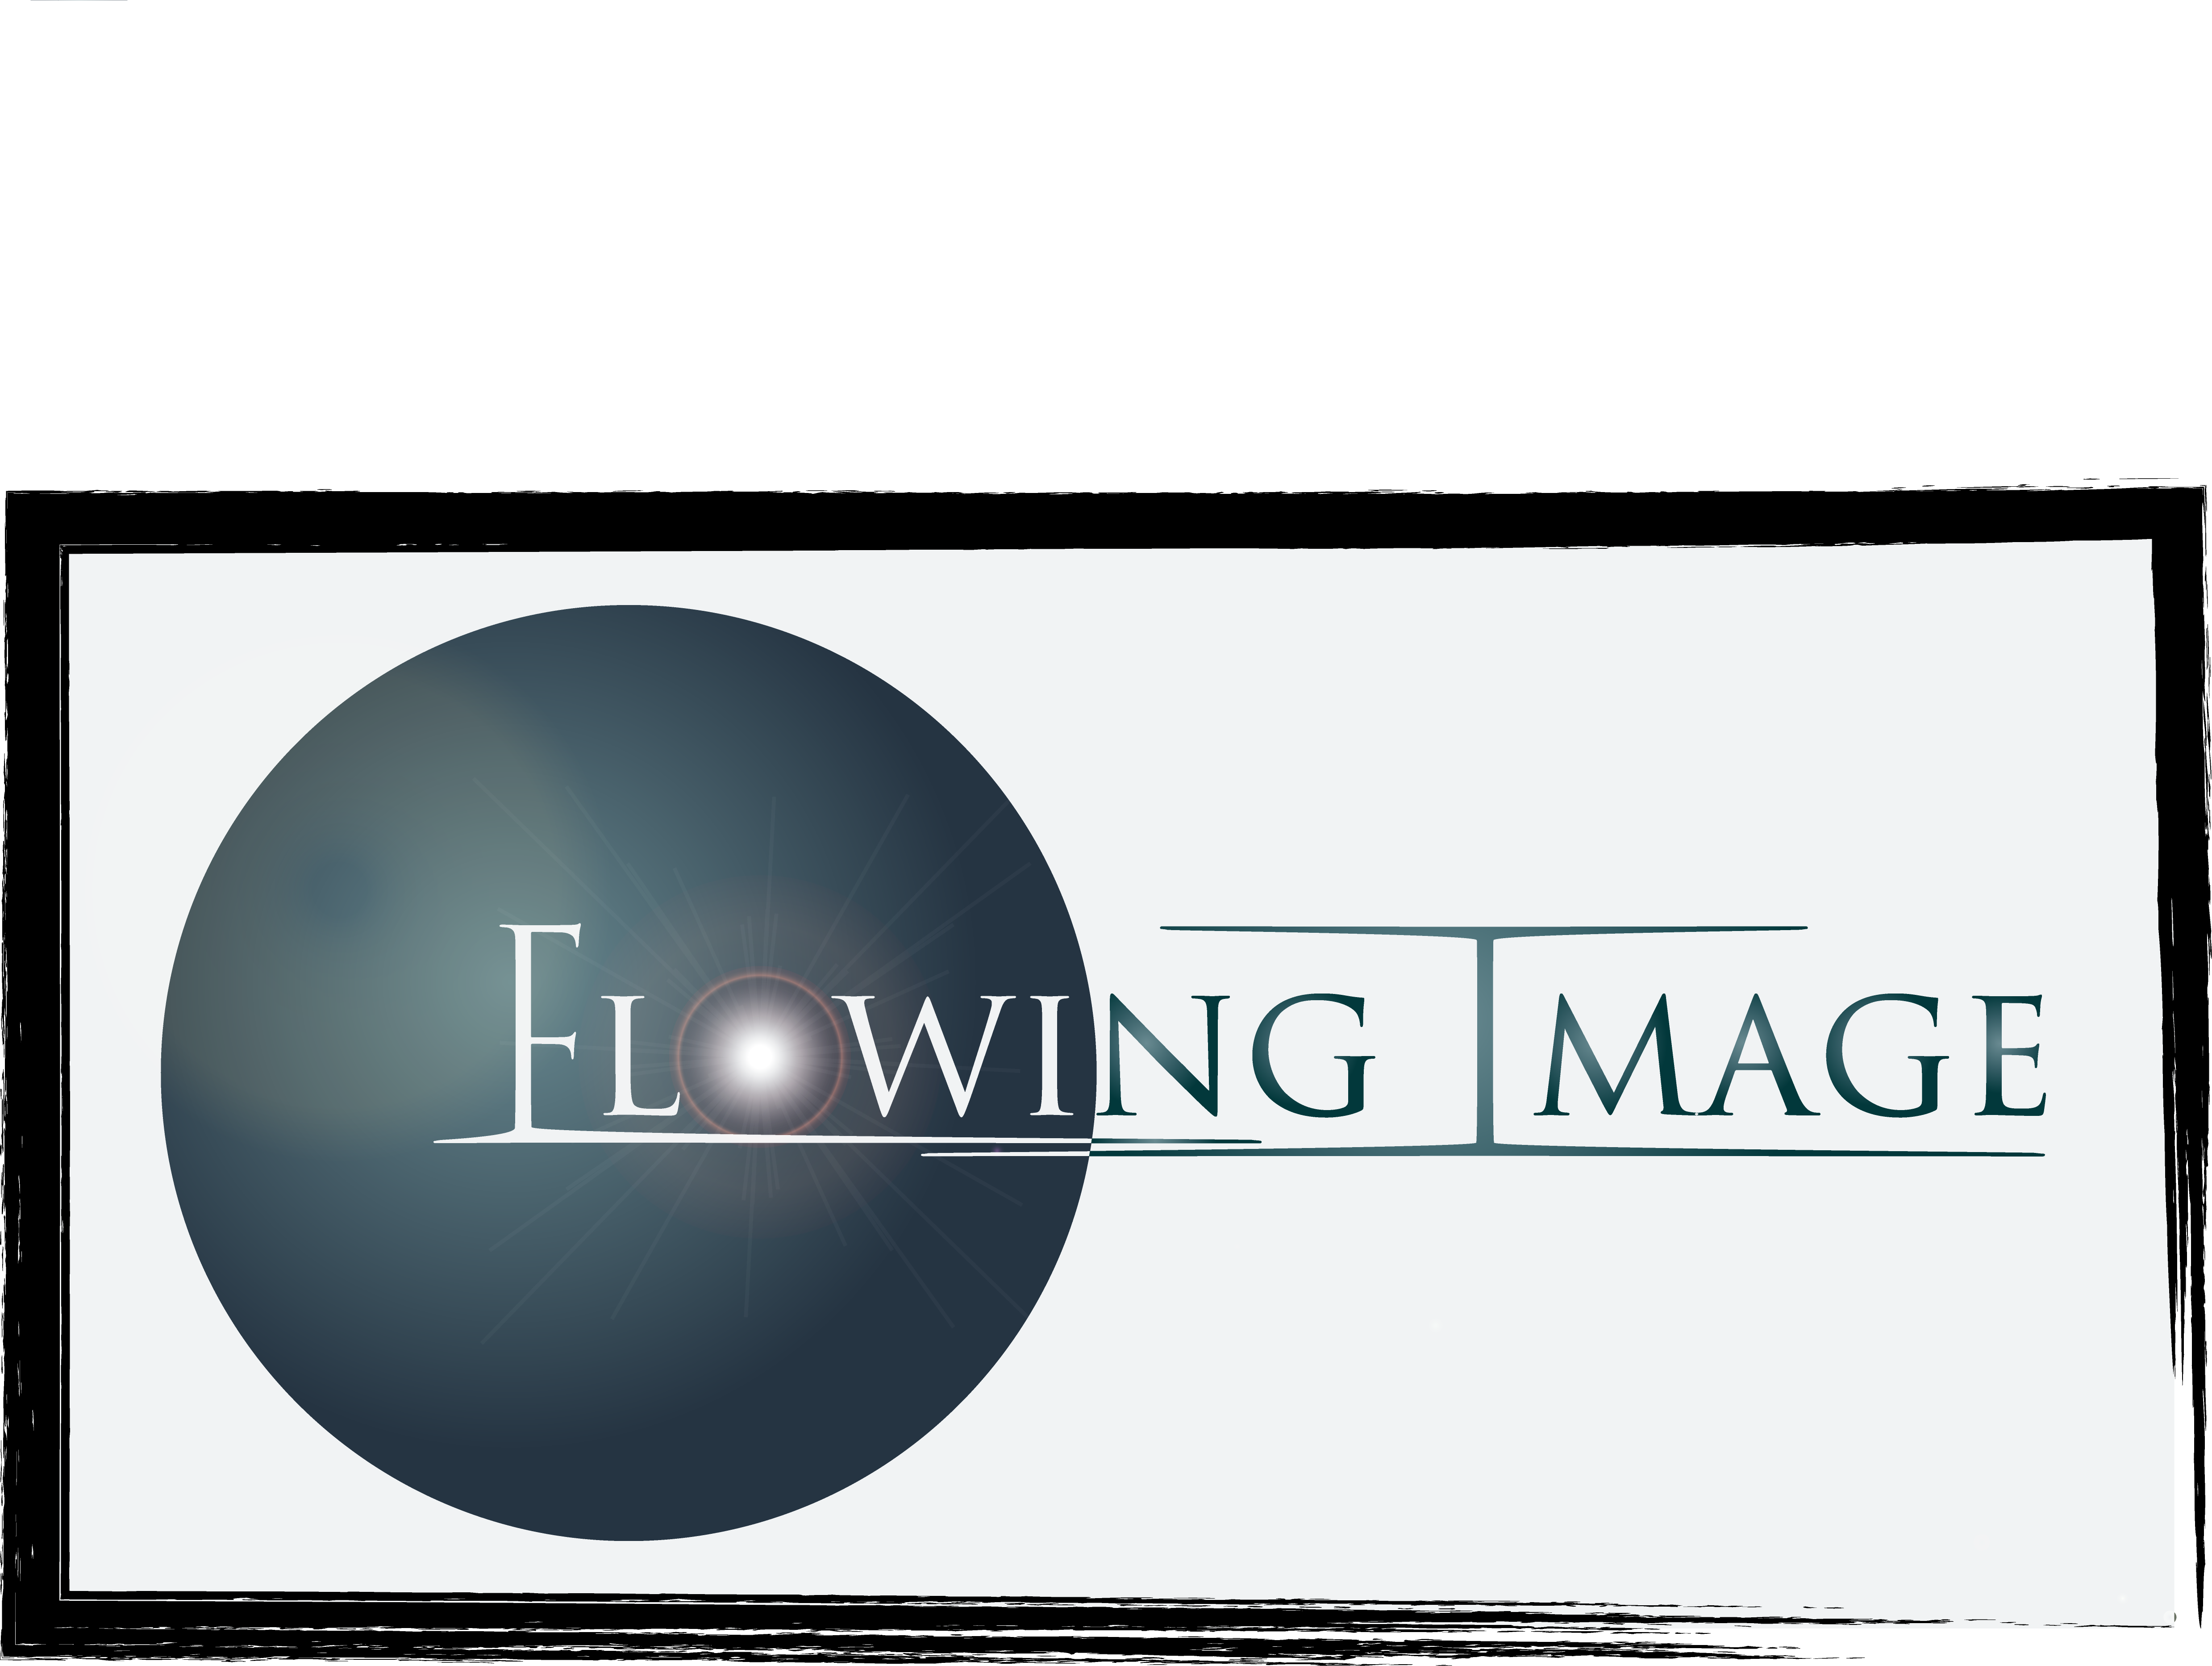 Flowing Image logo with the words Flowing Image intersecting with a circle